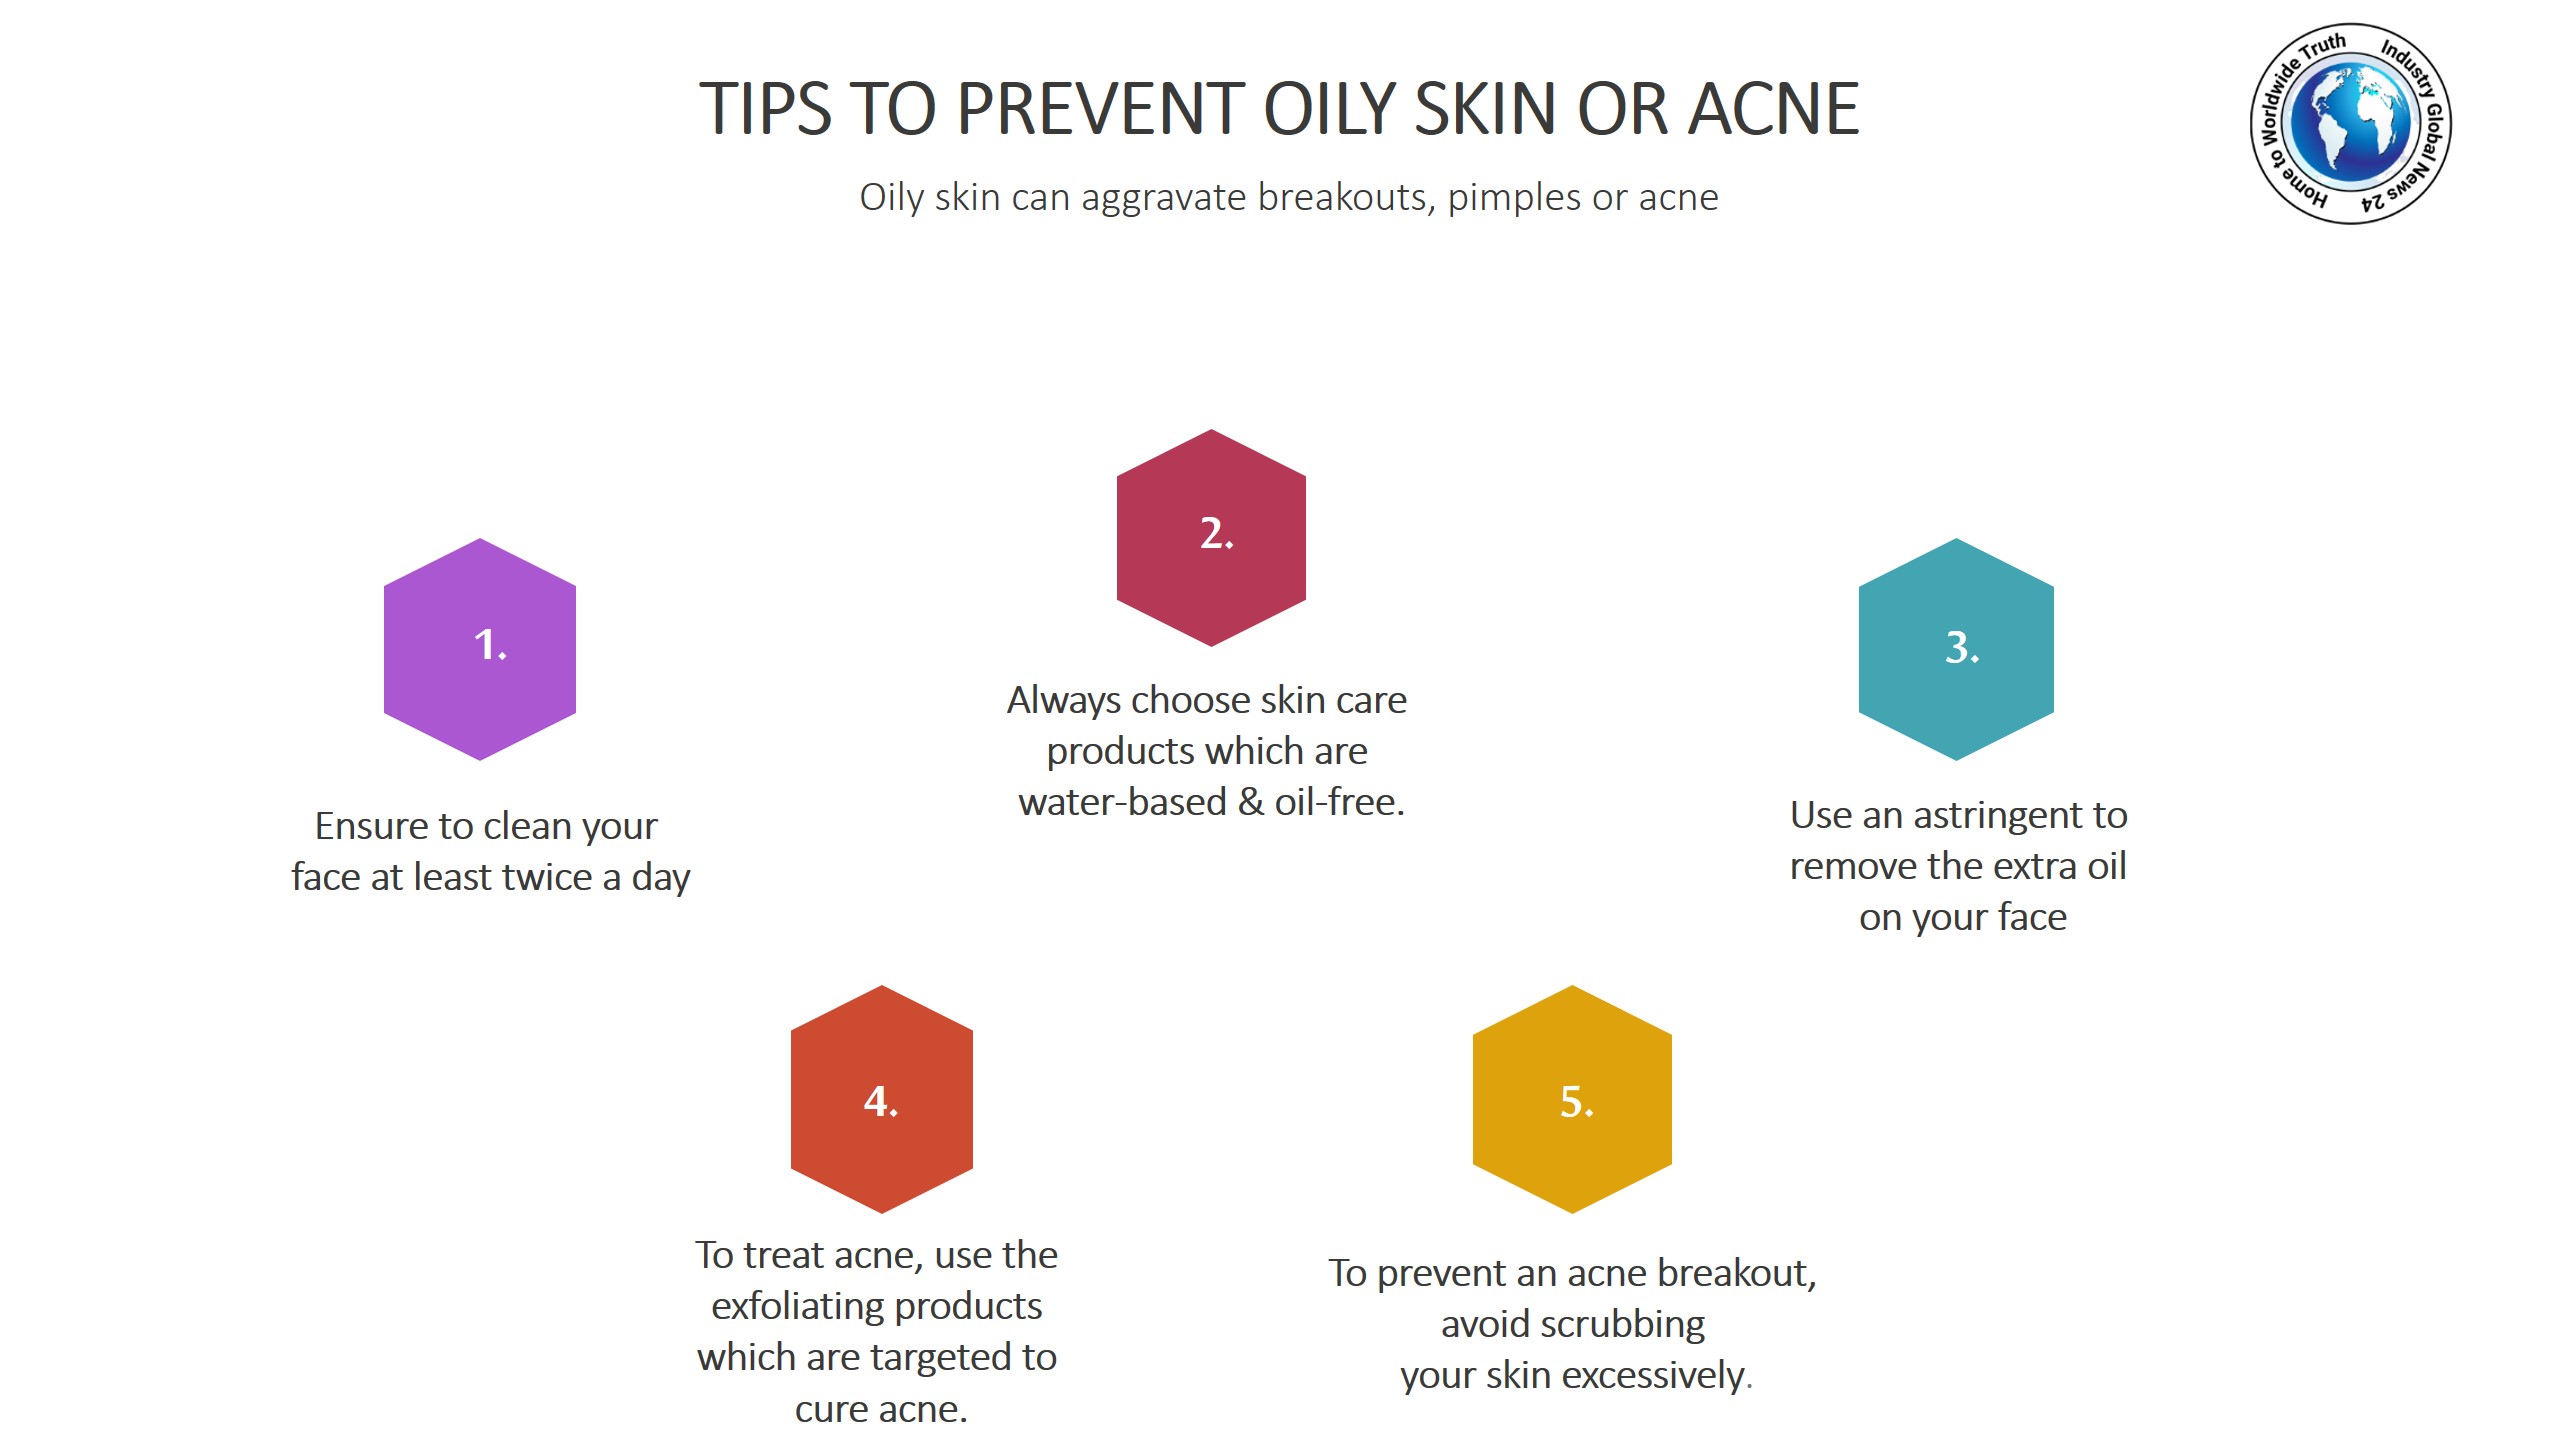 Tips to prevent oily skin or acne